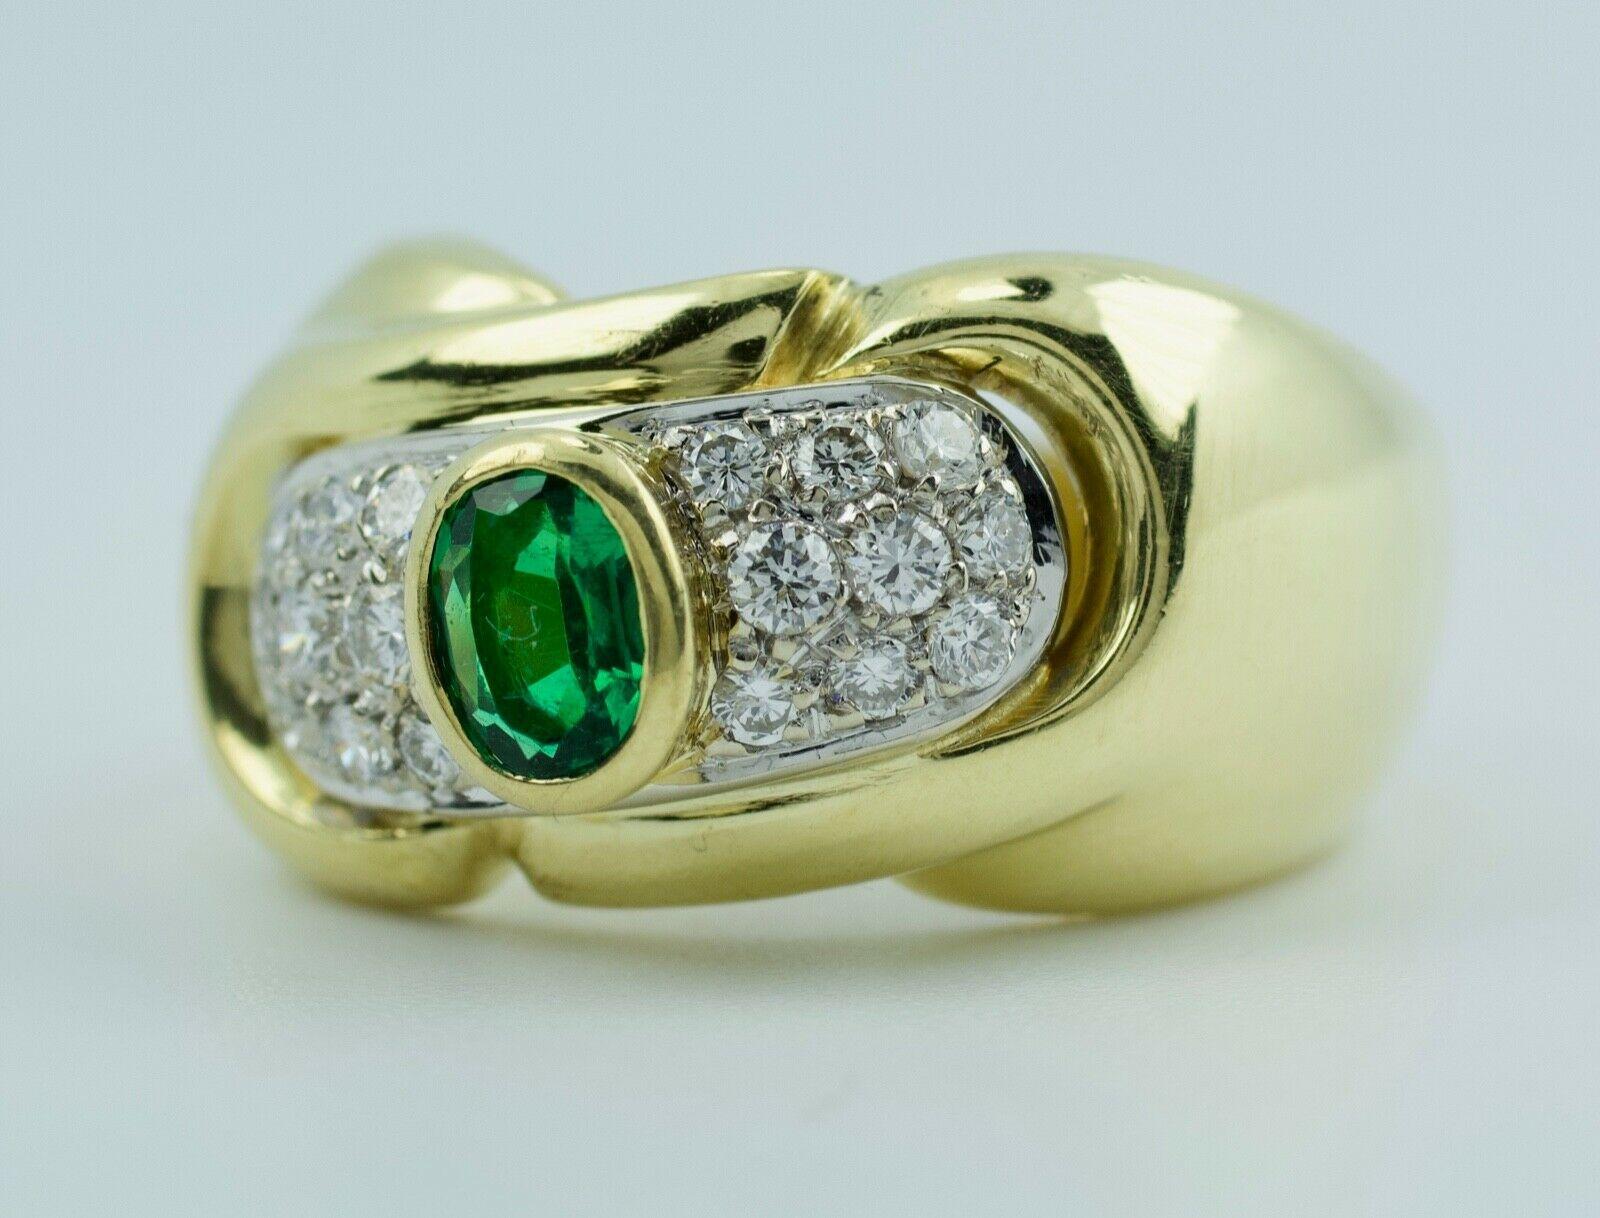 Vintage 18k Yellow Gold Oval Emerald With Round White Diamonds Ring
9.0 Grams
Ring Size 7.5
18 White Round Cut Diamonds 0.36 Carats Total Weight
Color: E-F Clarity: VS1-2
1 Oval Cut Green Emerald 5x4mm
the emerald in this ring is a very clean gem